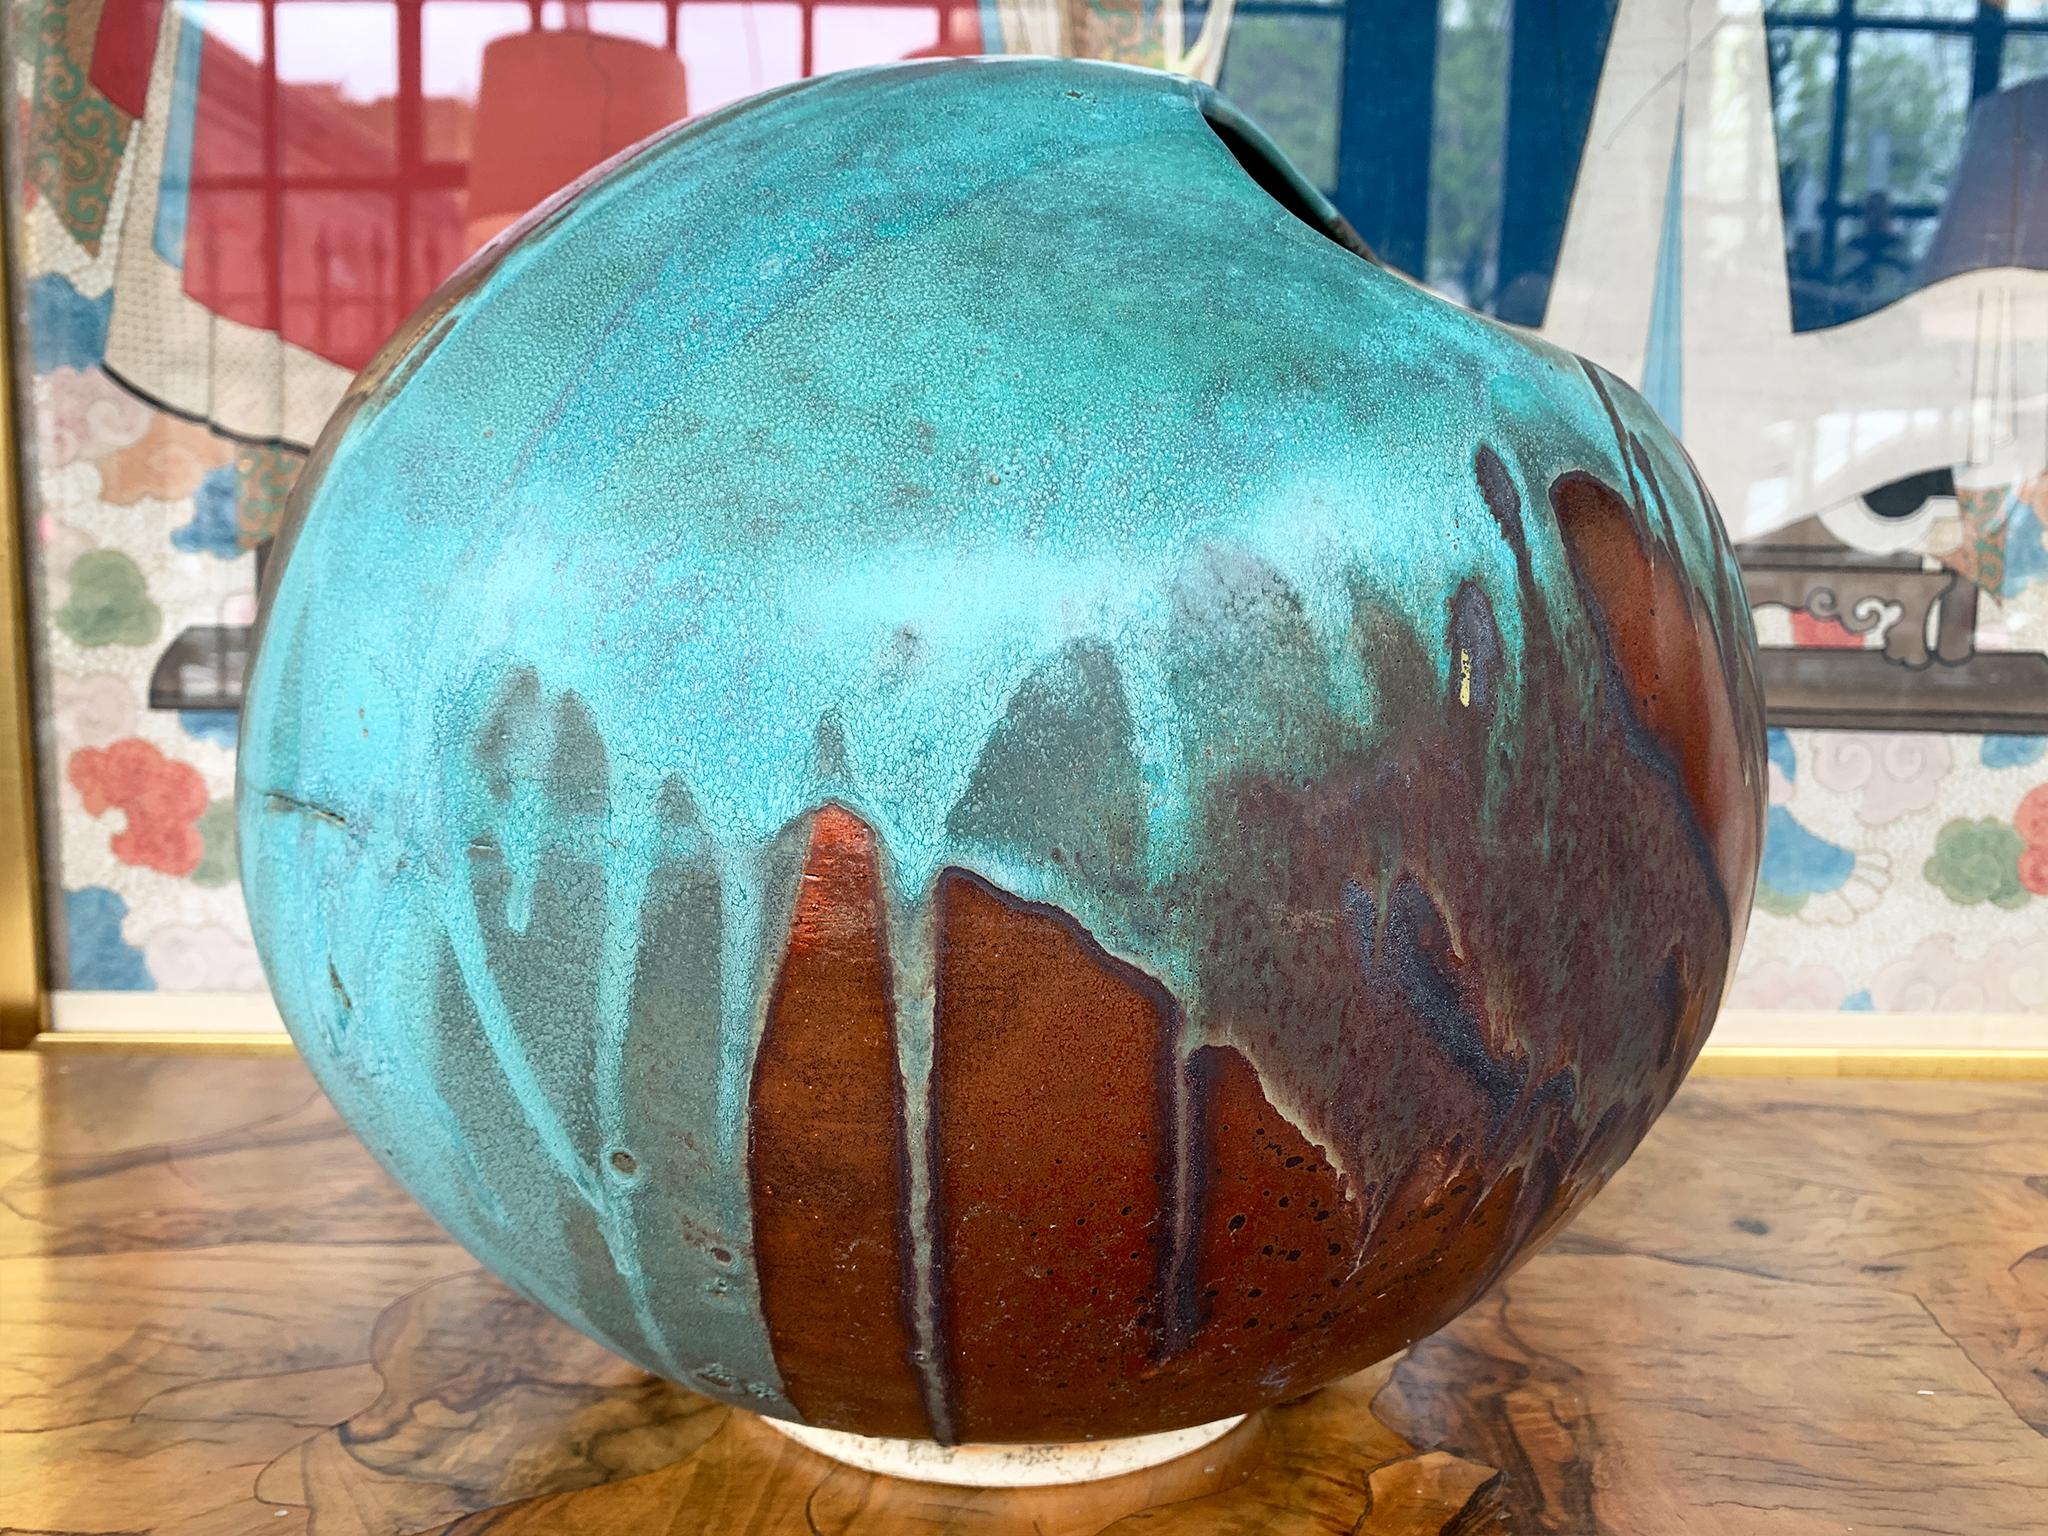 Glazed Thom Lussier Ceramic Vessel #3 - From the Oxidized Copper Collection For Sale